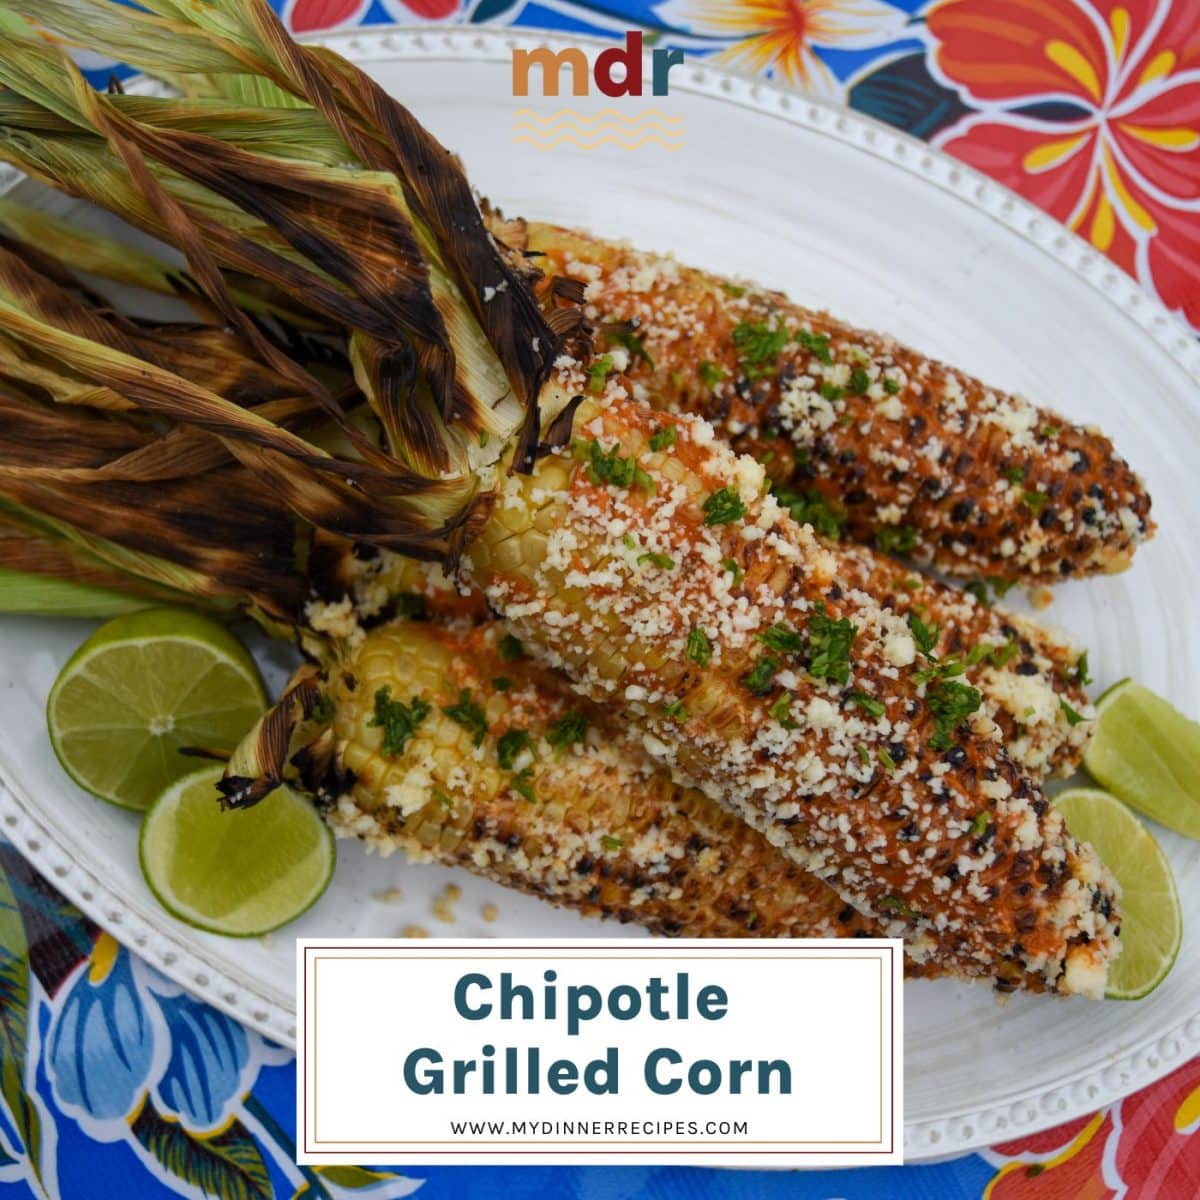 Ears of chipotle grilled corn on white platter with limes wedges on colorful tablecloth. 